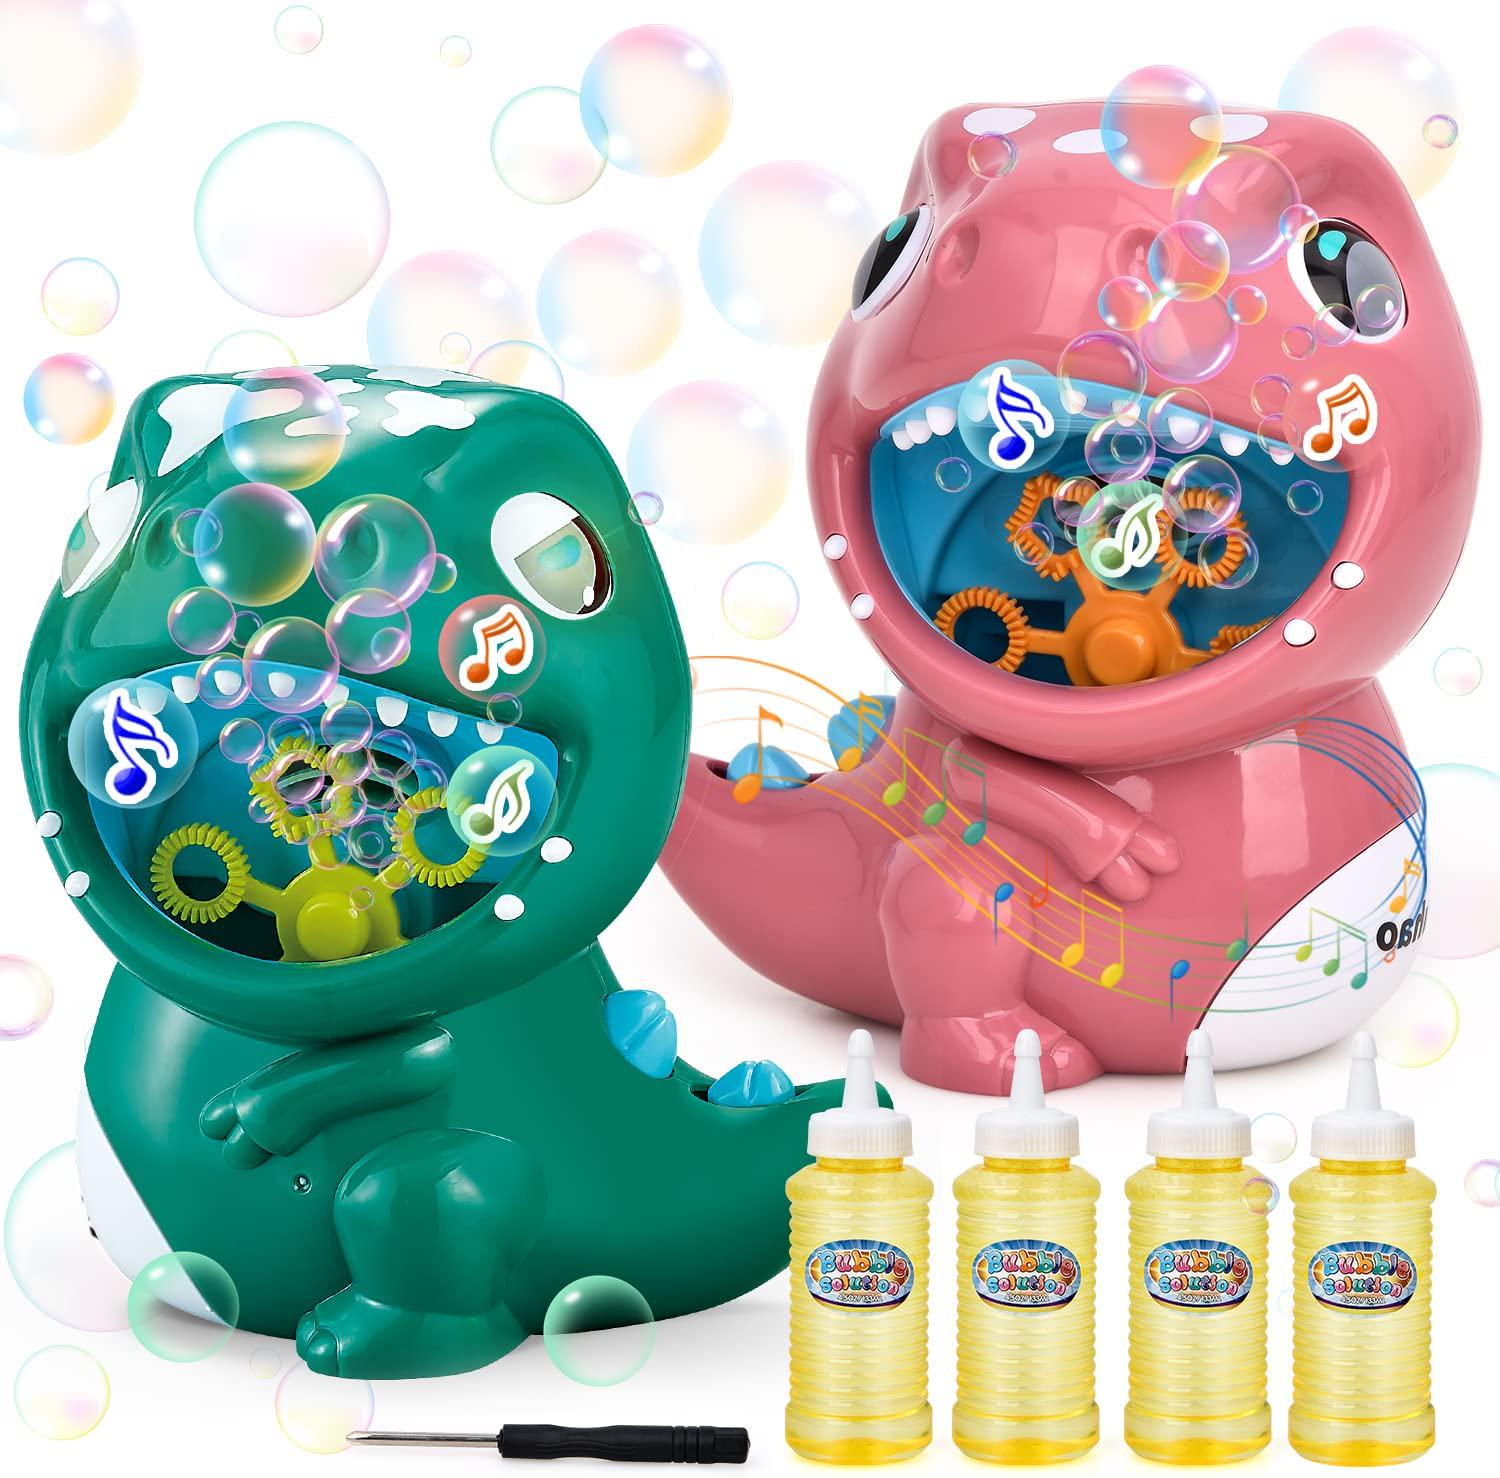 Sotodik, Kids Bubble Machine, 2PCS Automatic Bubble Maker with Music and Sound 4 Bubble Solution for Boys Girls Indoor Outdoor Play Gift